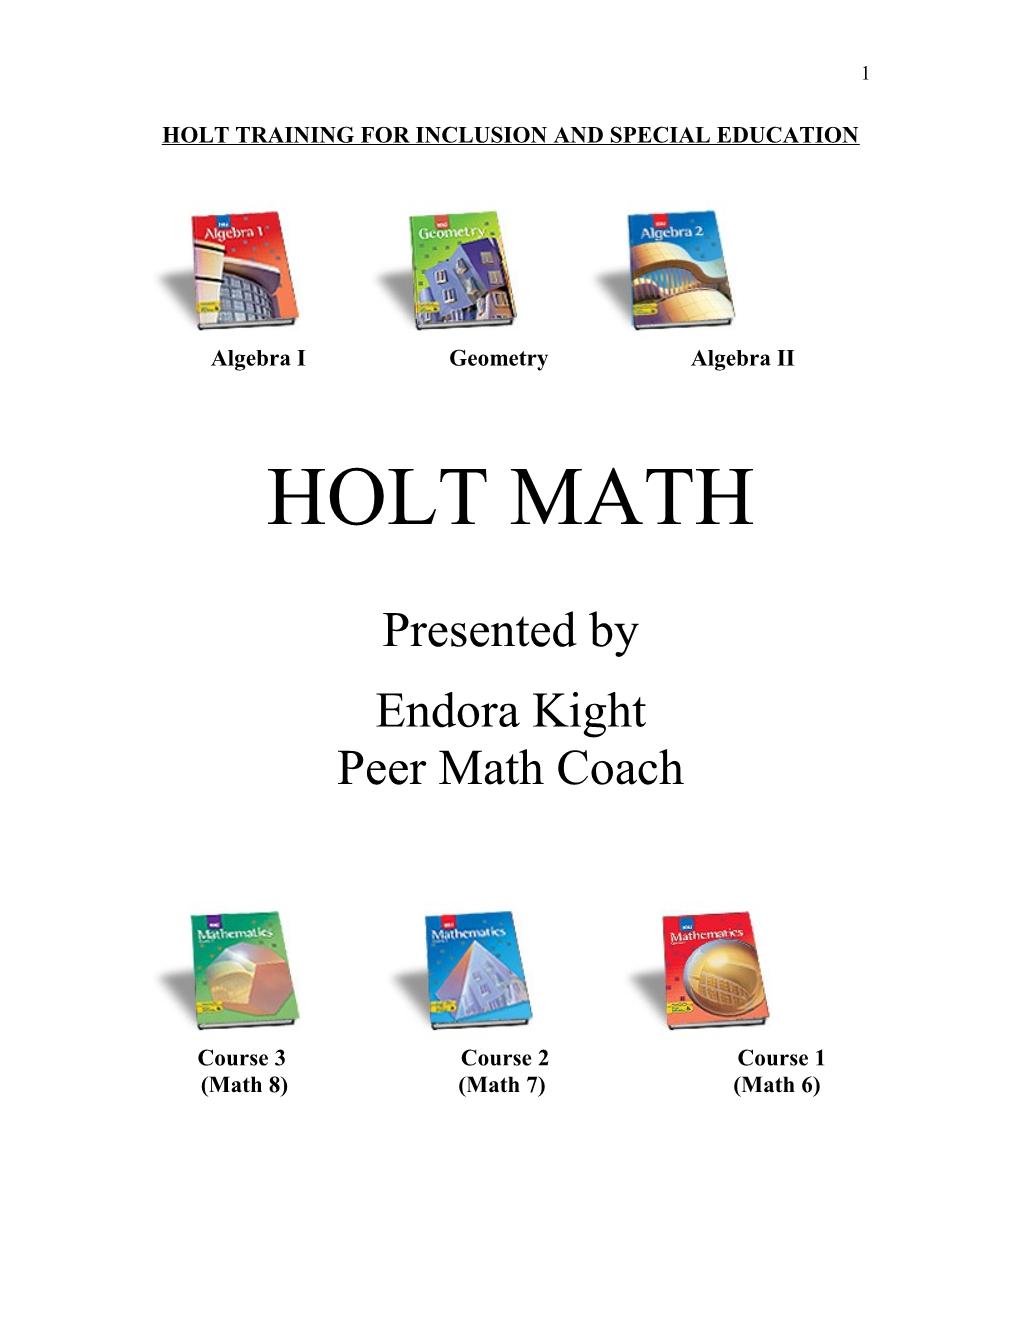 How to Access Holt Online Lesson Tutorial Videos